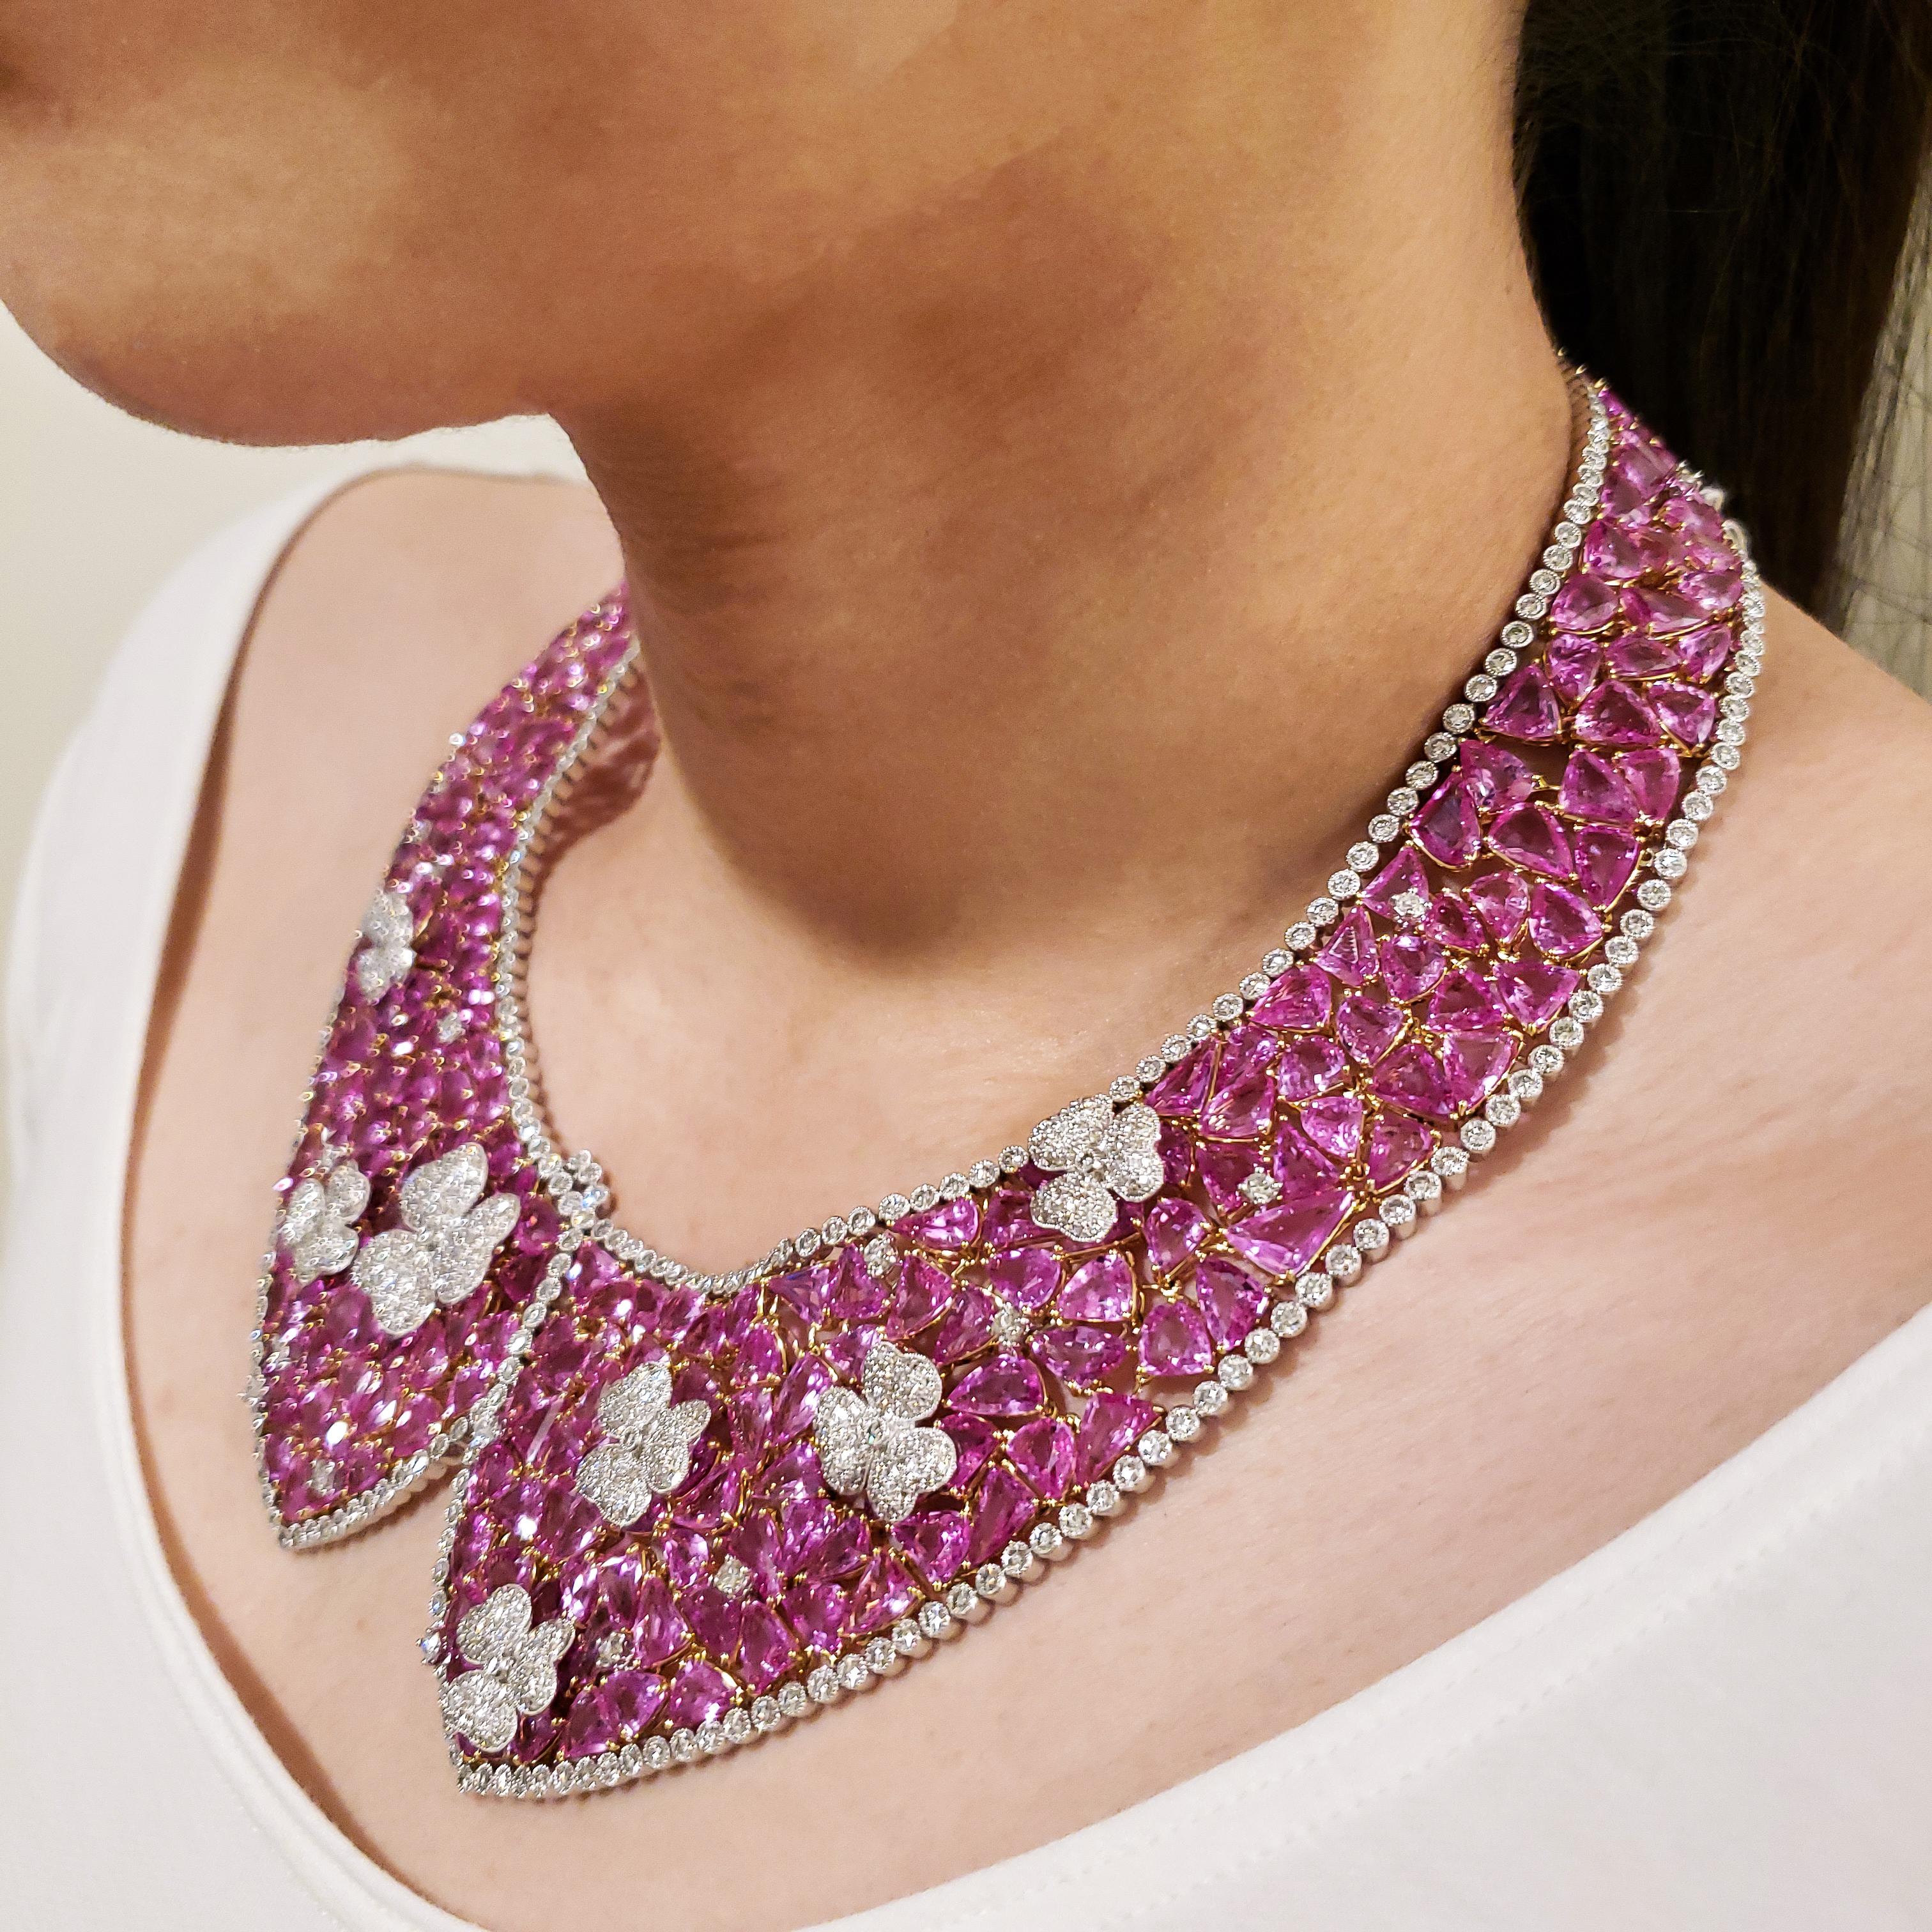 Modern 238.27 Carat Mixed Cut Pink Sapphire and Diamond Collar Necklace For Sale